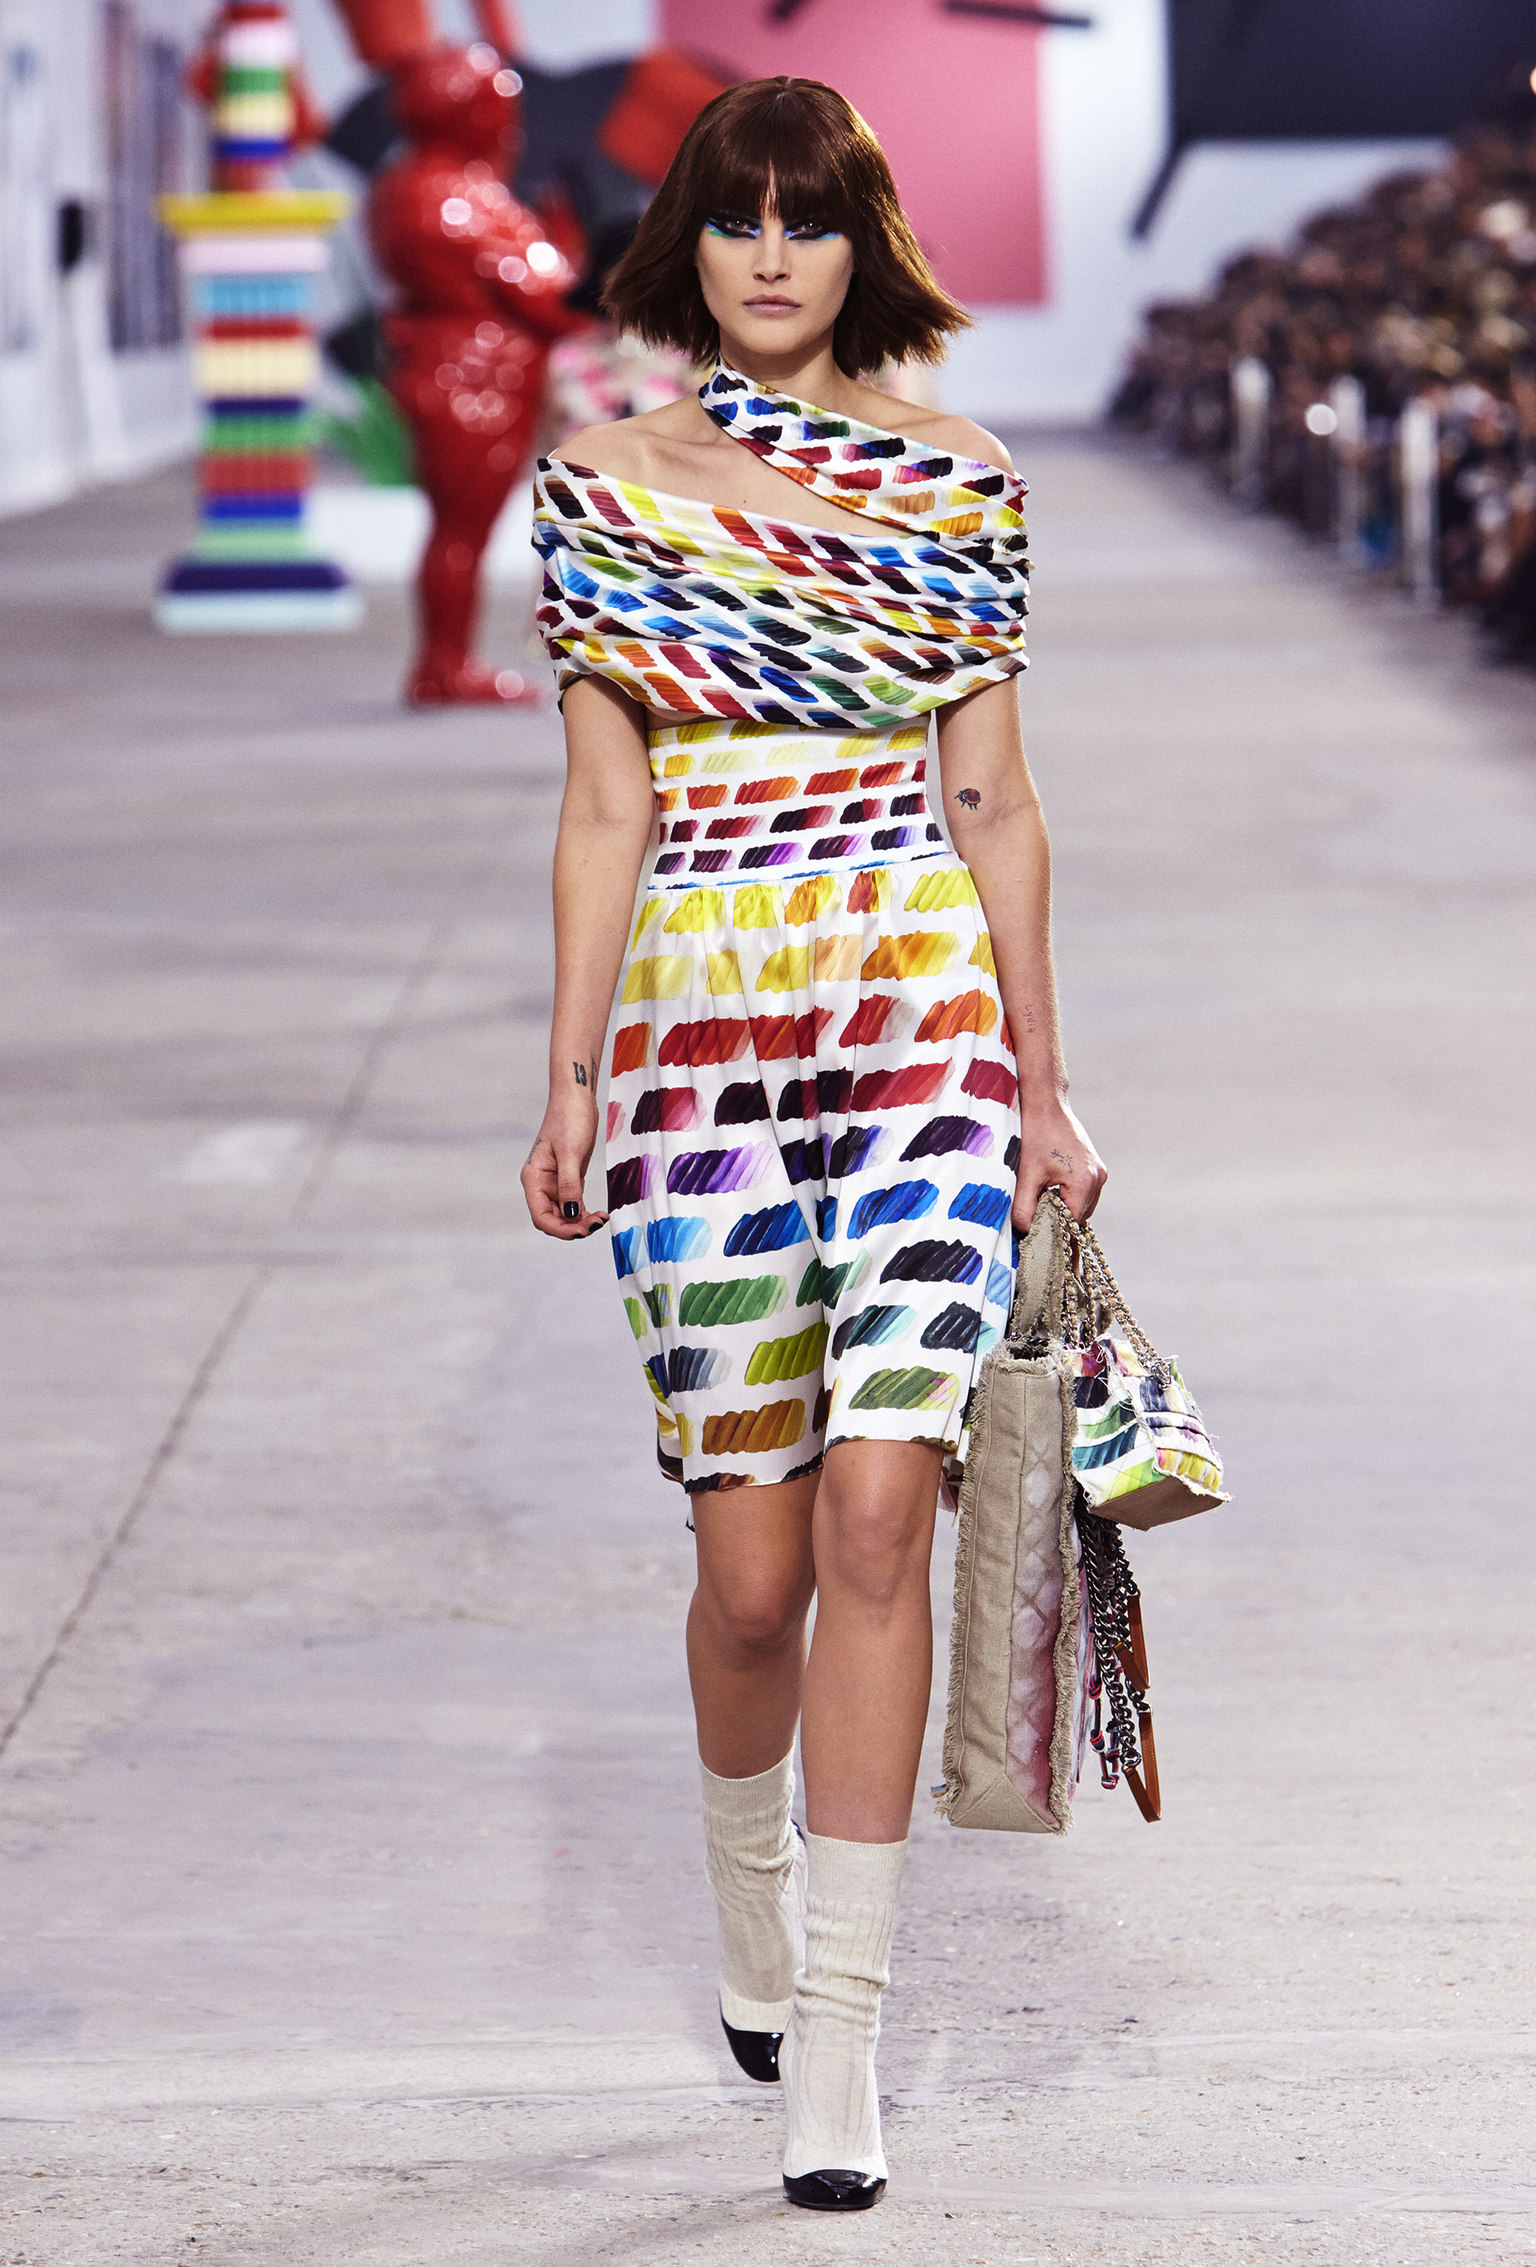 weekend distraction: Chanel Spring/Summer 2014 – The Seventh Sphinx